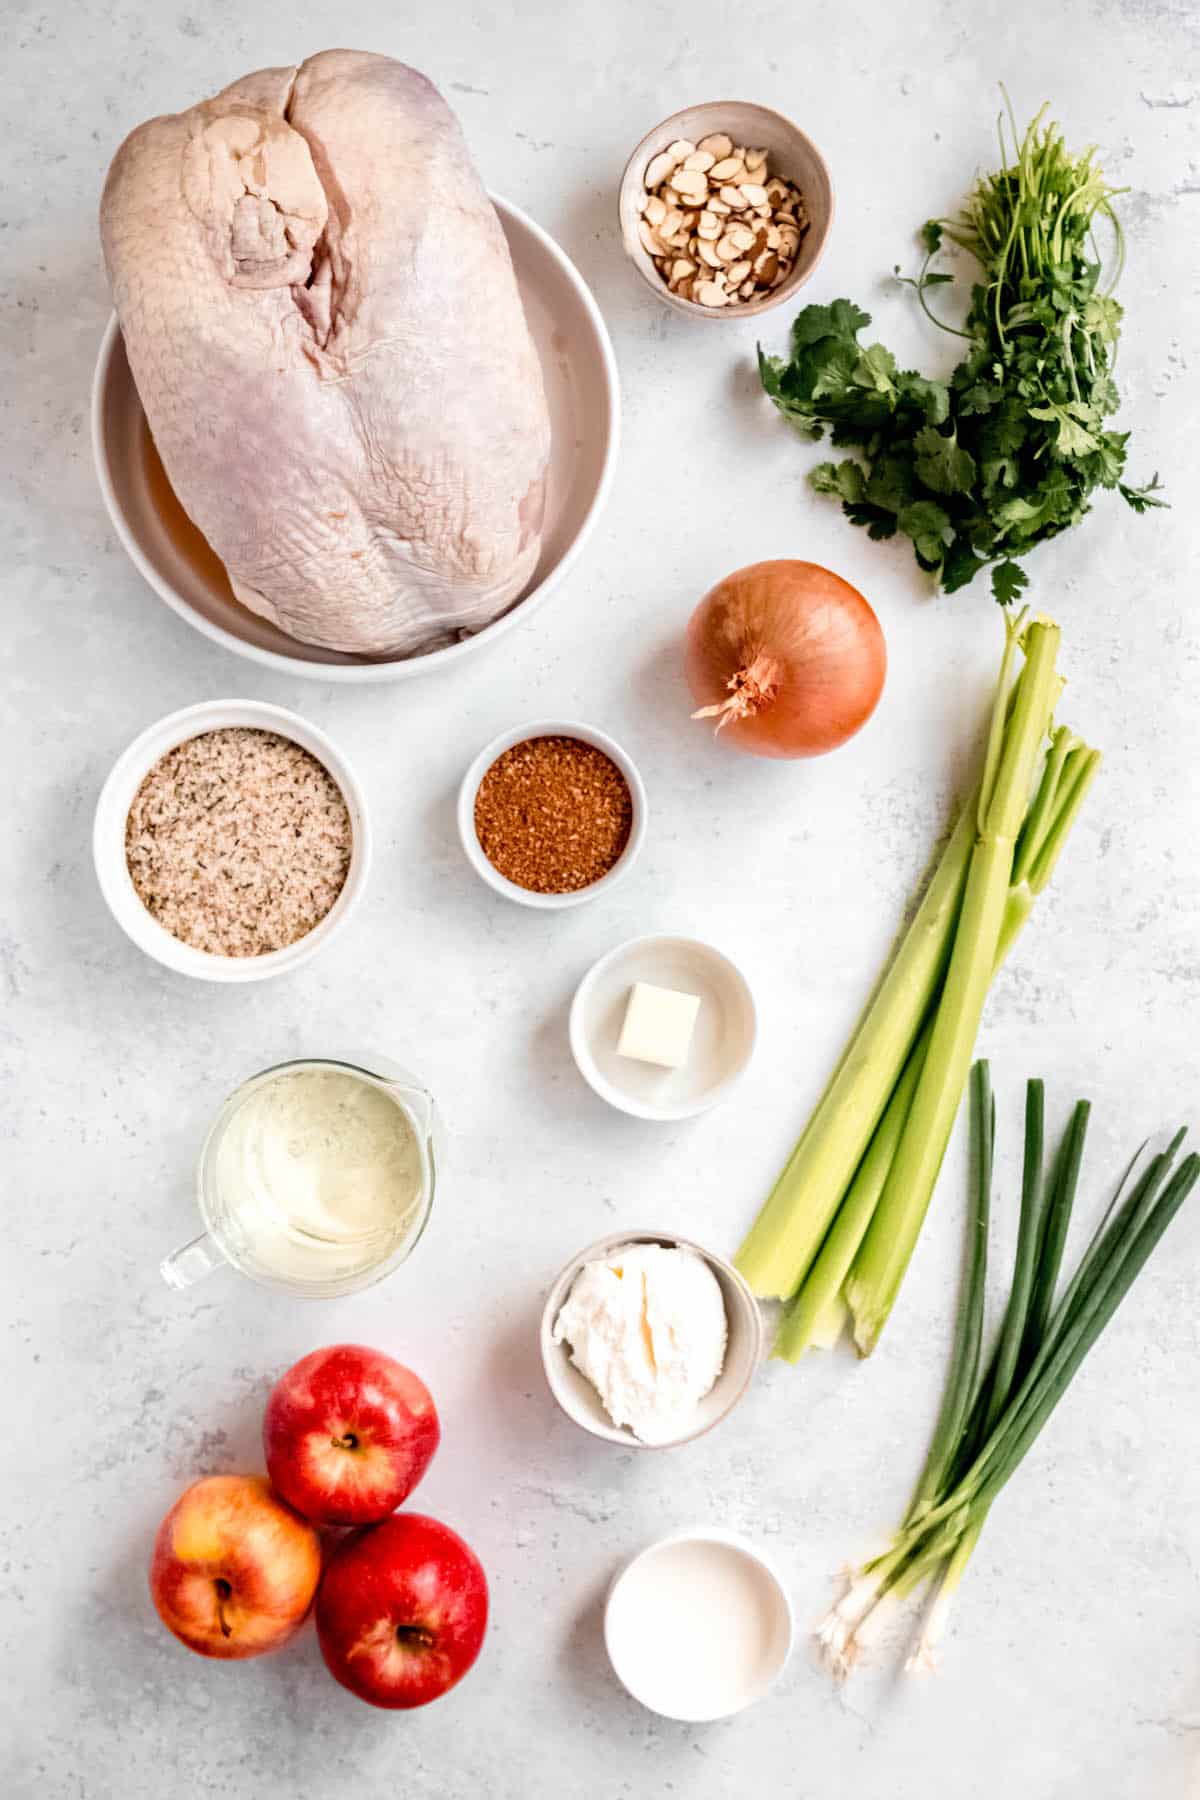 ingredients needed to make dutch oven turkey breast measured into bowls on a white table.